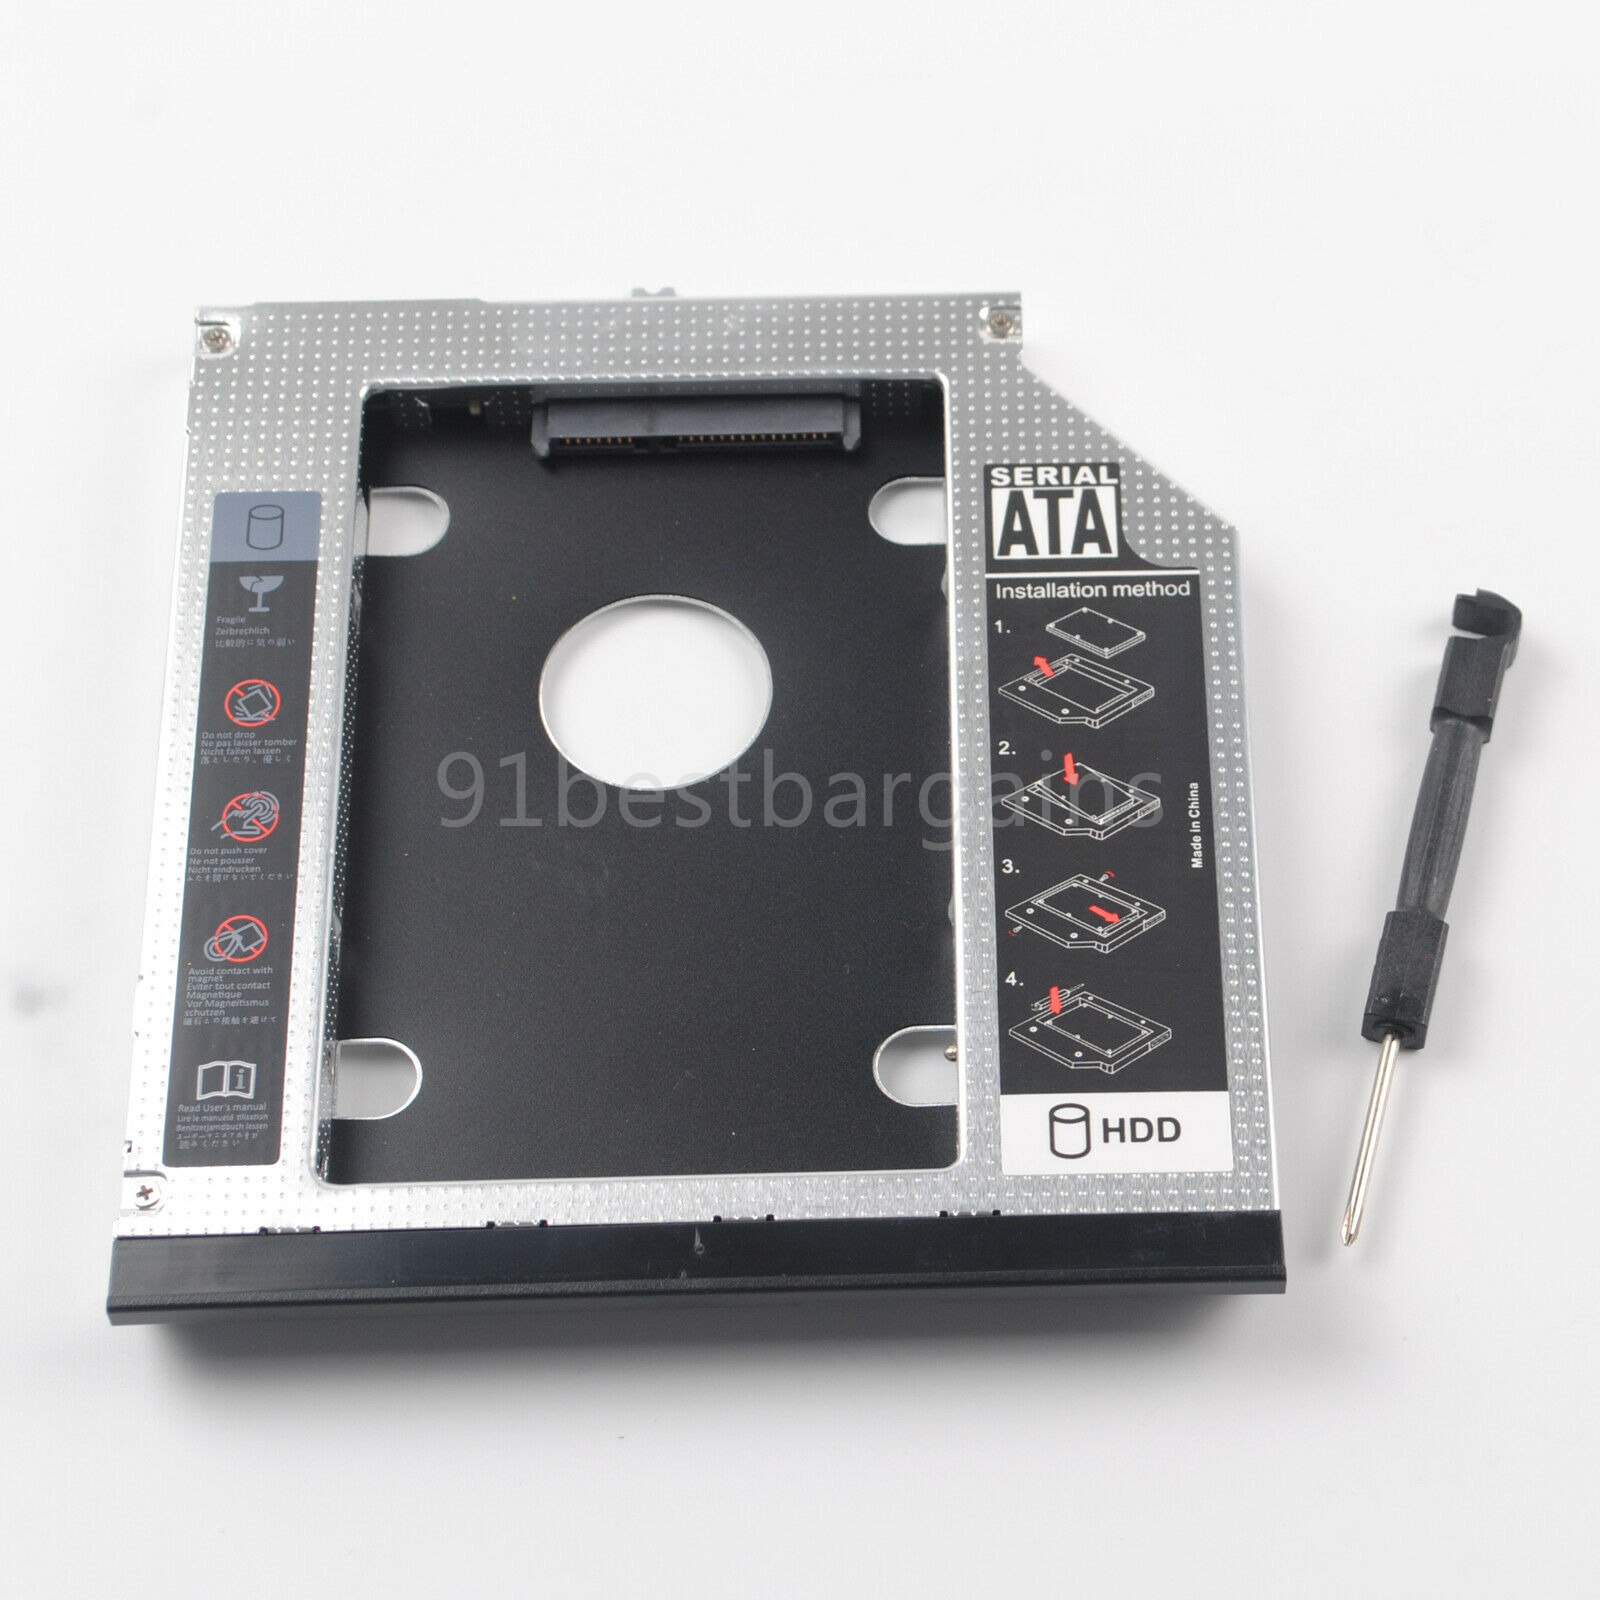 2Nd Hdd Ssd Hard Drive Caddy For Lenovo Thinkpad L440 L540 With Bezel Faceplate - $17.99